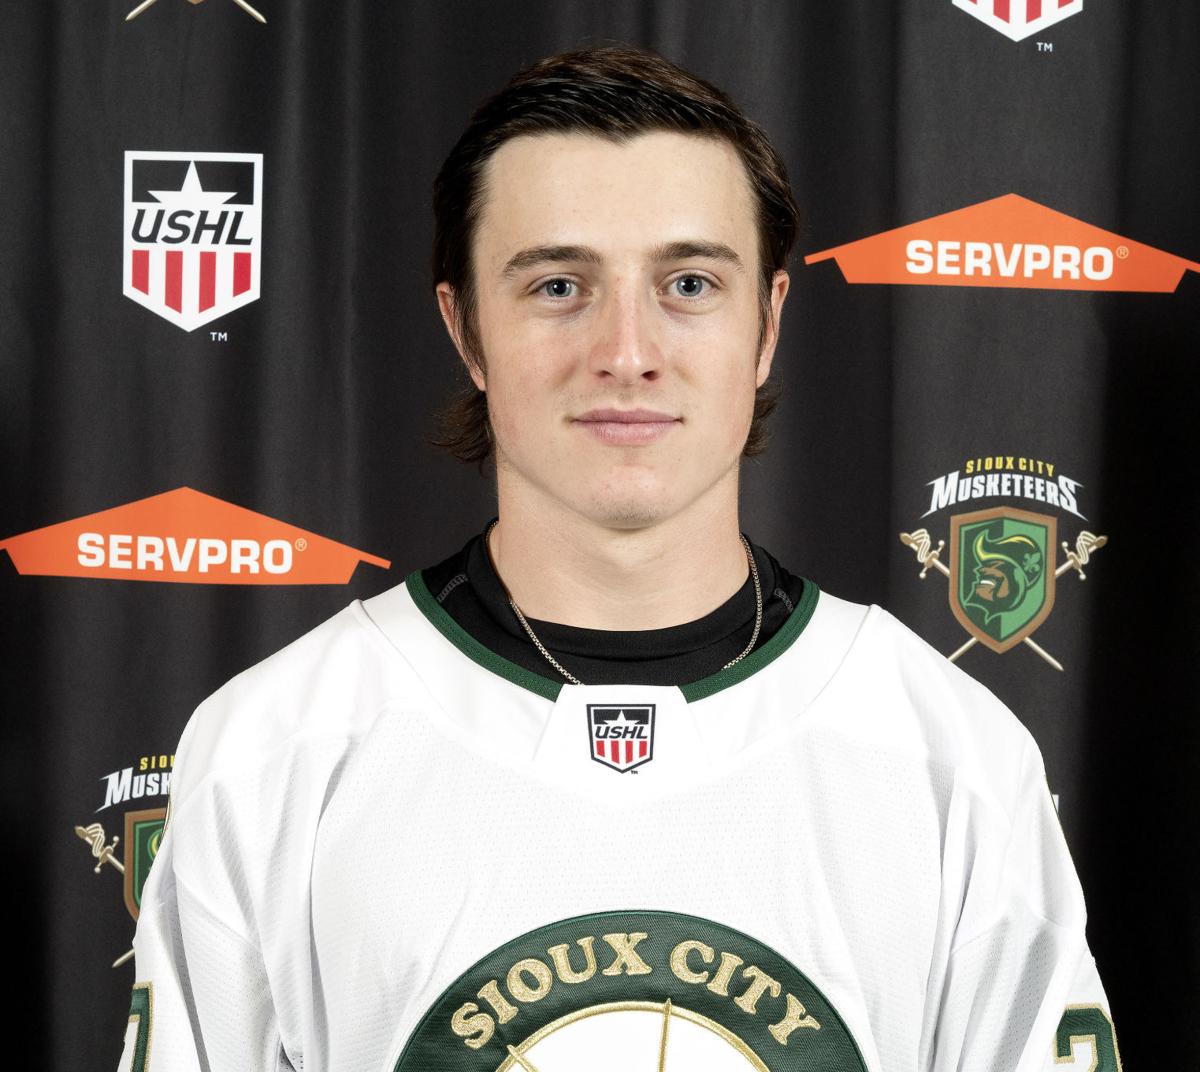 Sioux City Musketeers - Head Coach Luke Strand is welcoming the Musketeers  into Sioux City for the 2019-20 season #OurCityOurTeam